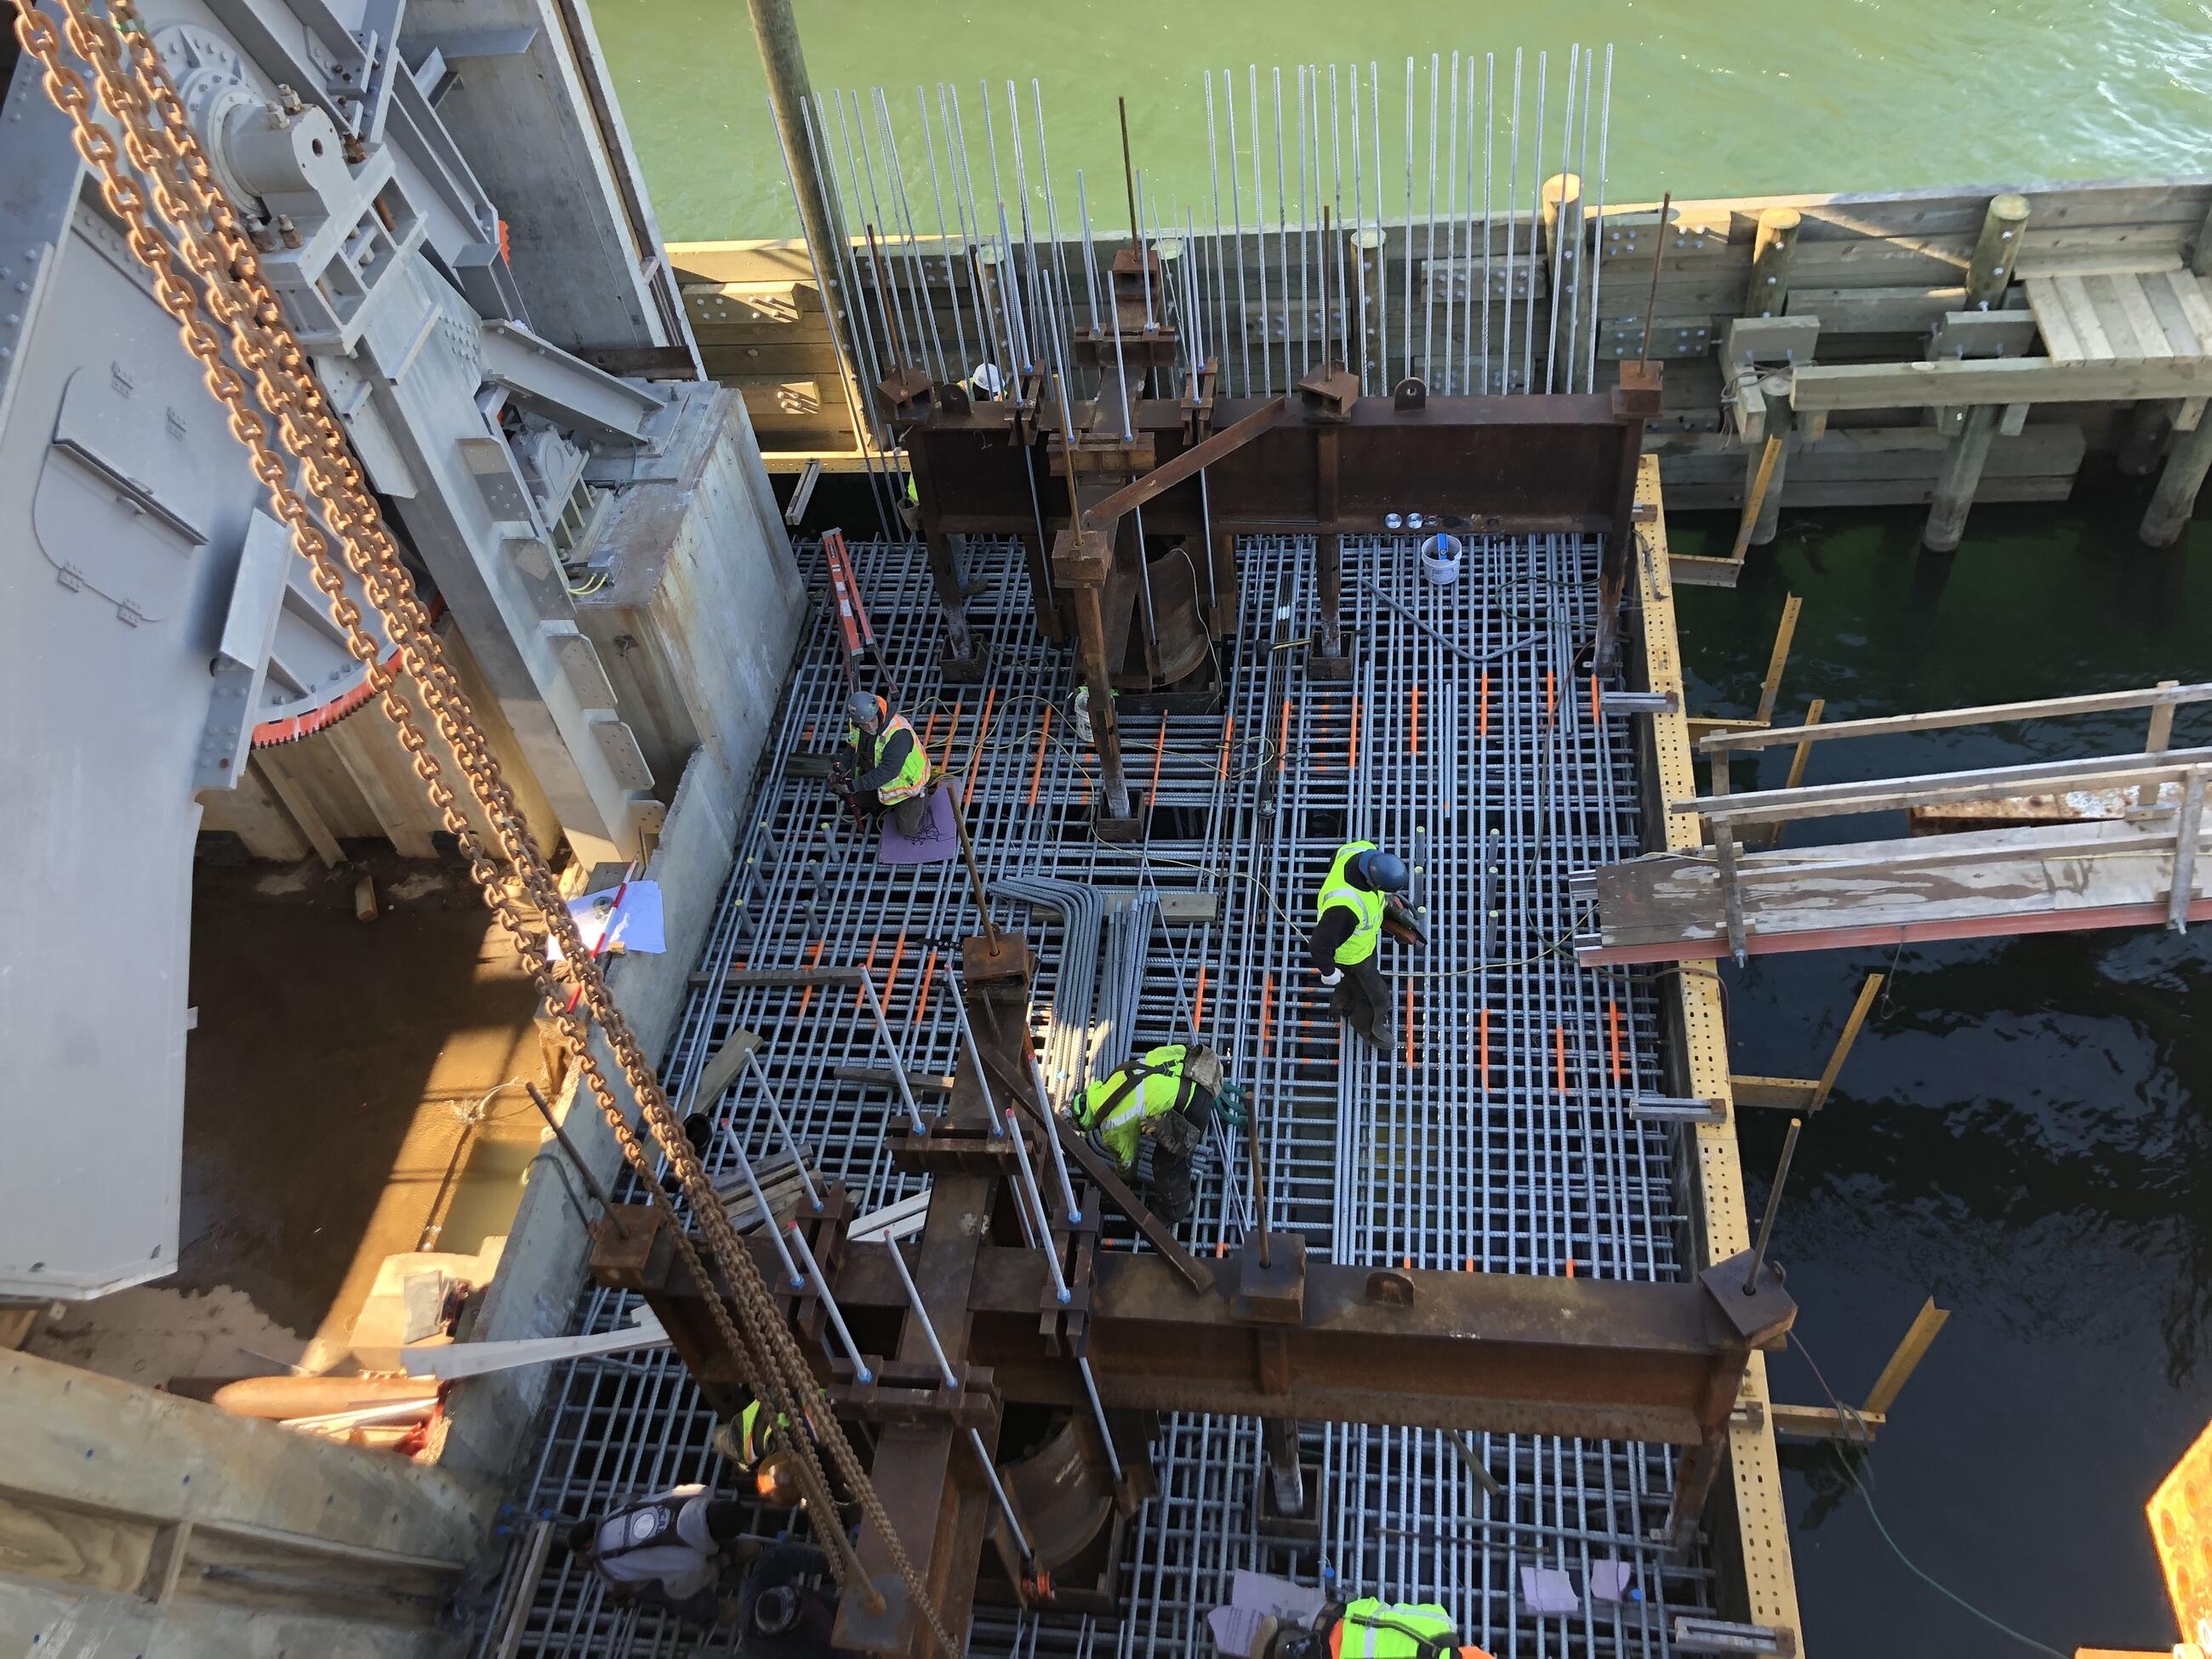 In an image photographed from overhead, four workers create the reinforcing grid of metal bars that will be embedded within the poured concrete to form the pier cap. They stand and kneel atop the gridwork before the concrete is poured. The movable bascule span is shown at left, the waterway at the top of the photo.